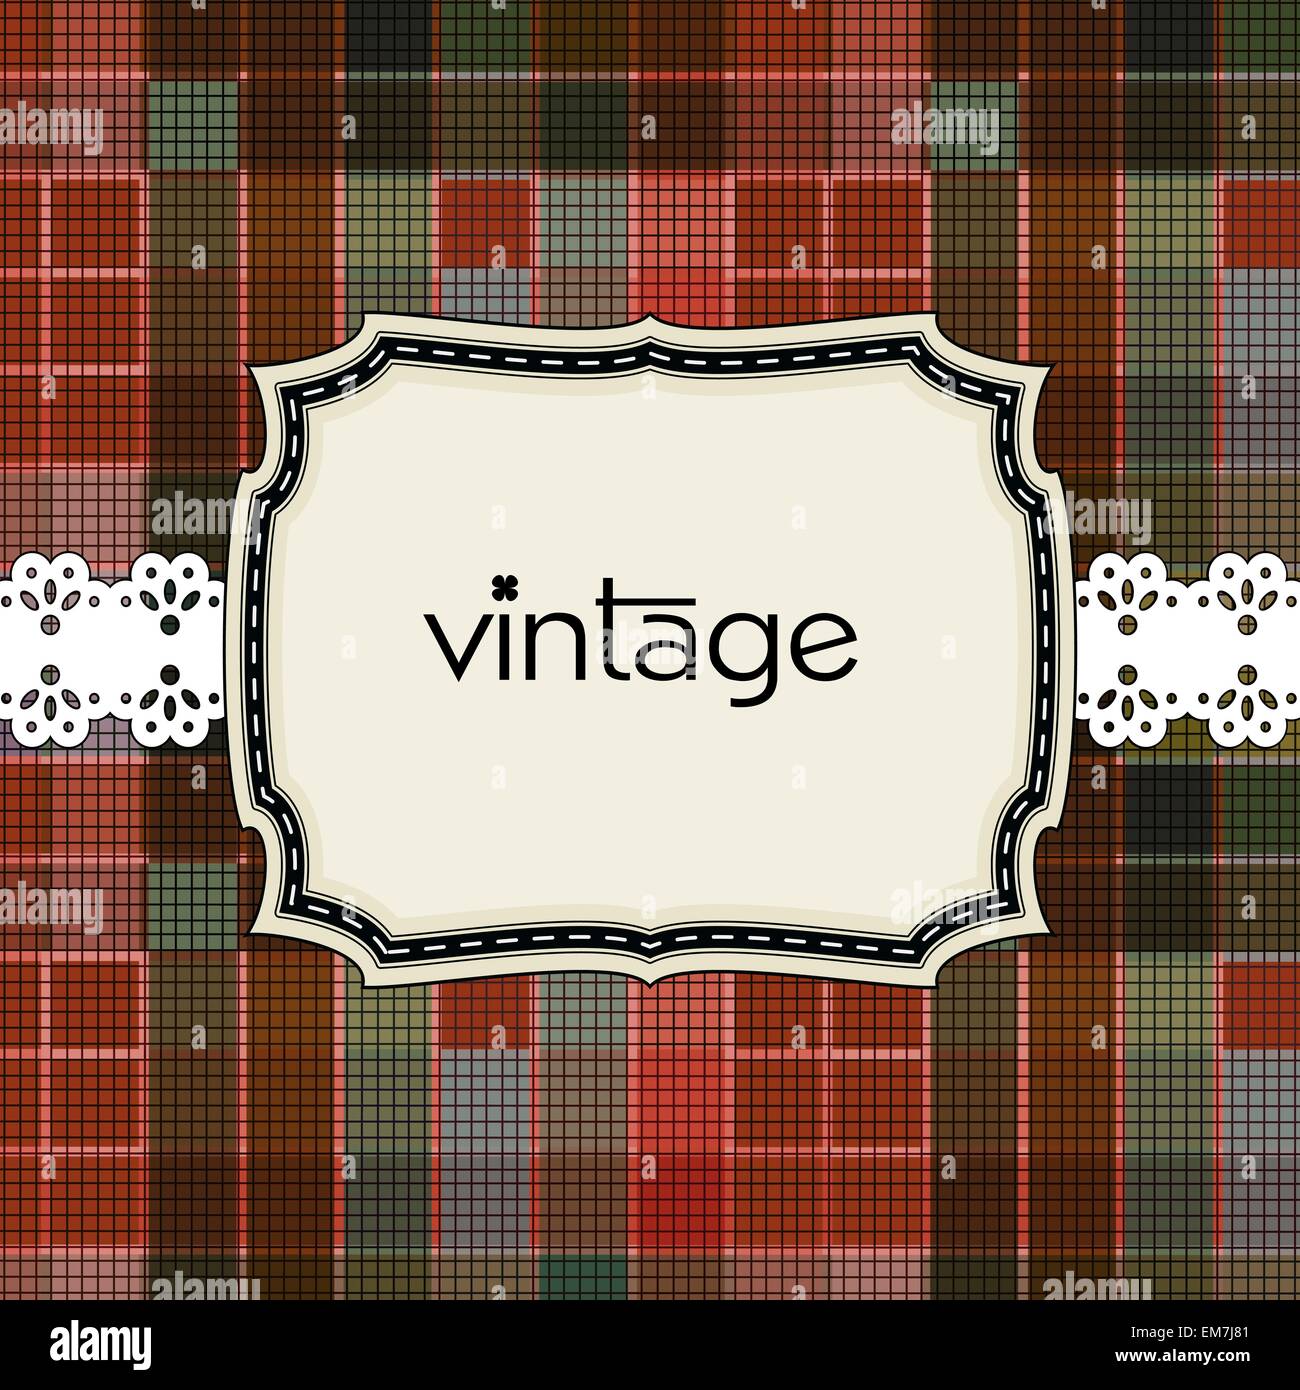 Vintage greeting card template Stock Vector